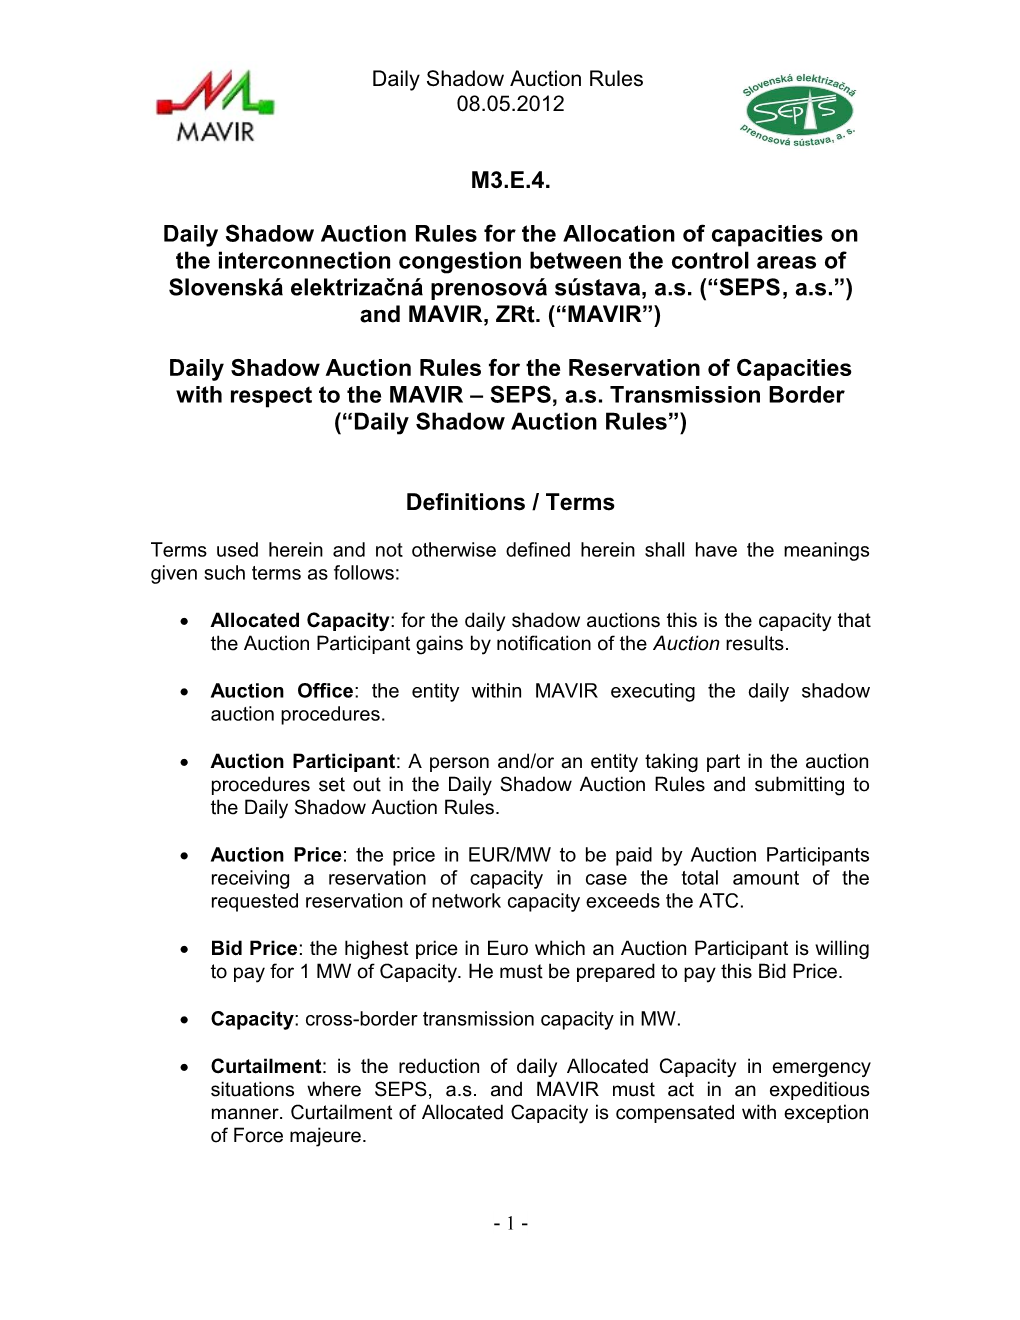 Daily Shadowauction Rules for the Reservation of Capacities